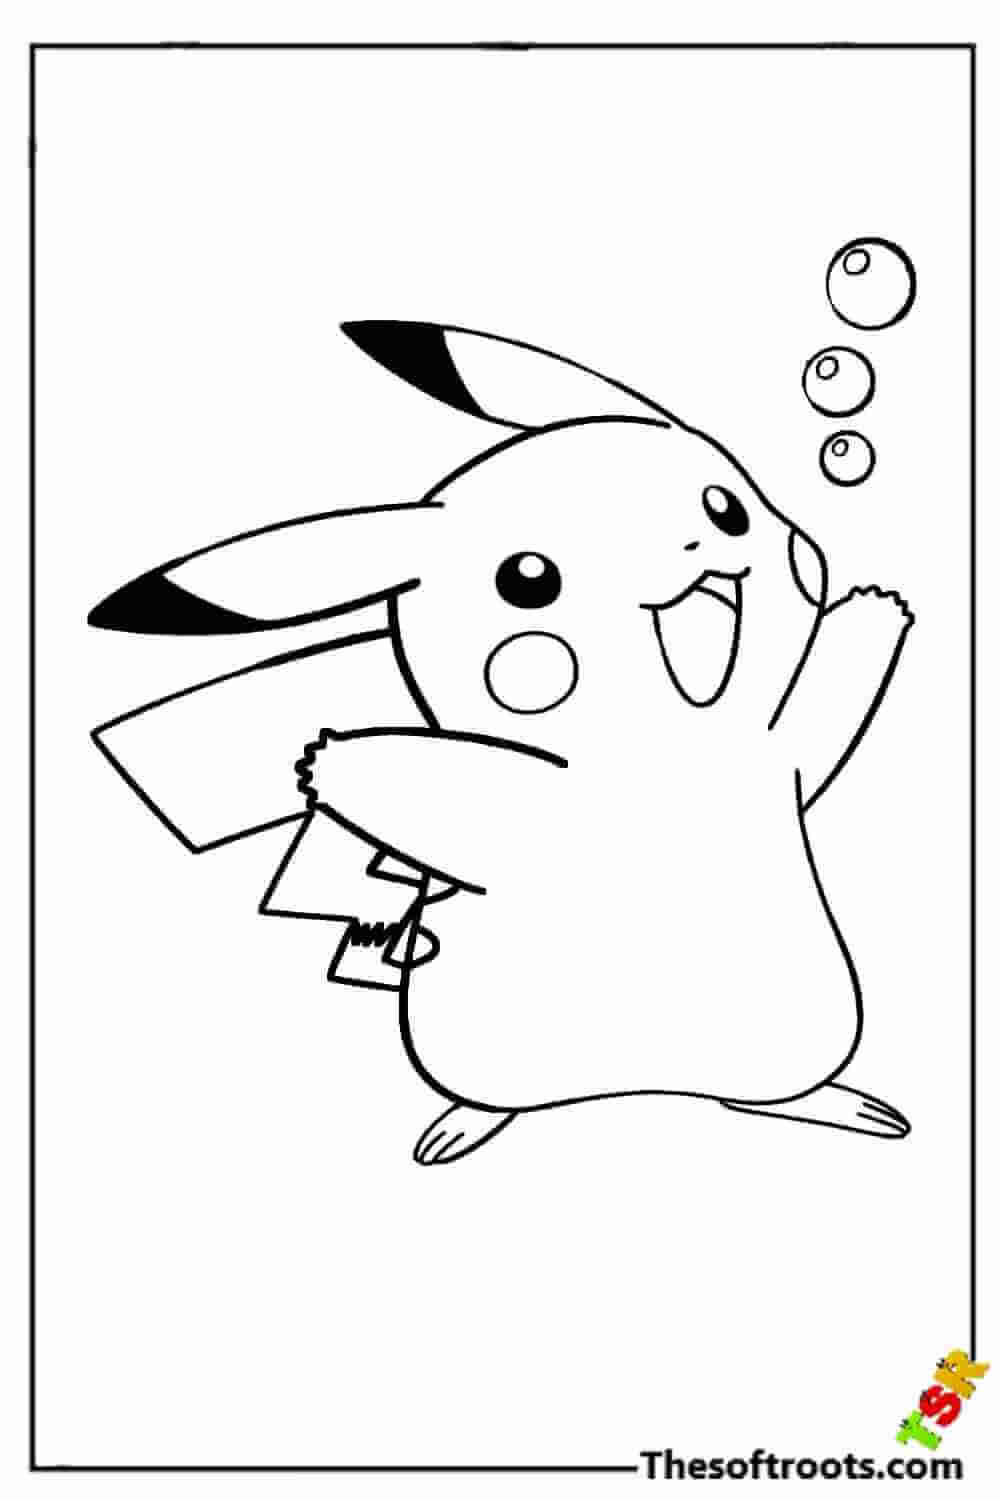 Pikachu and bubbles coloring pages